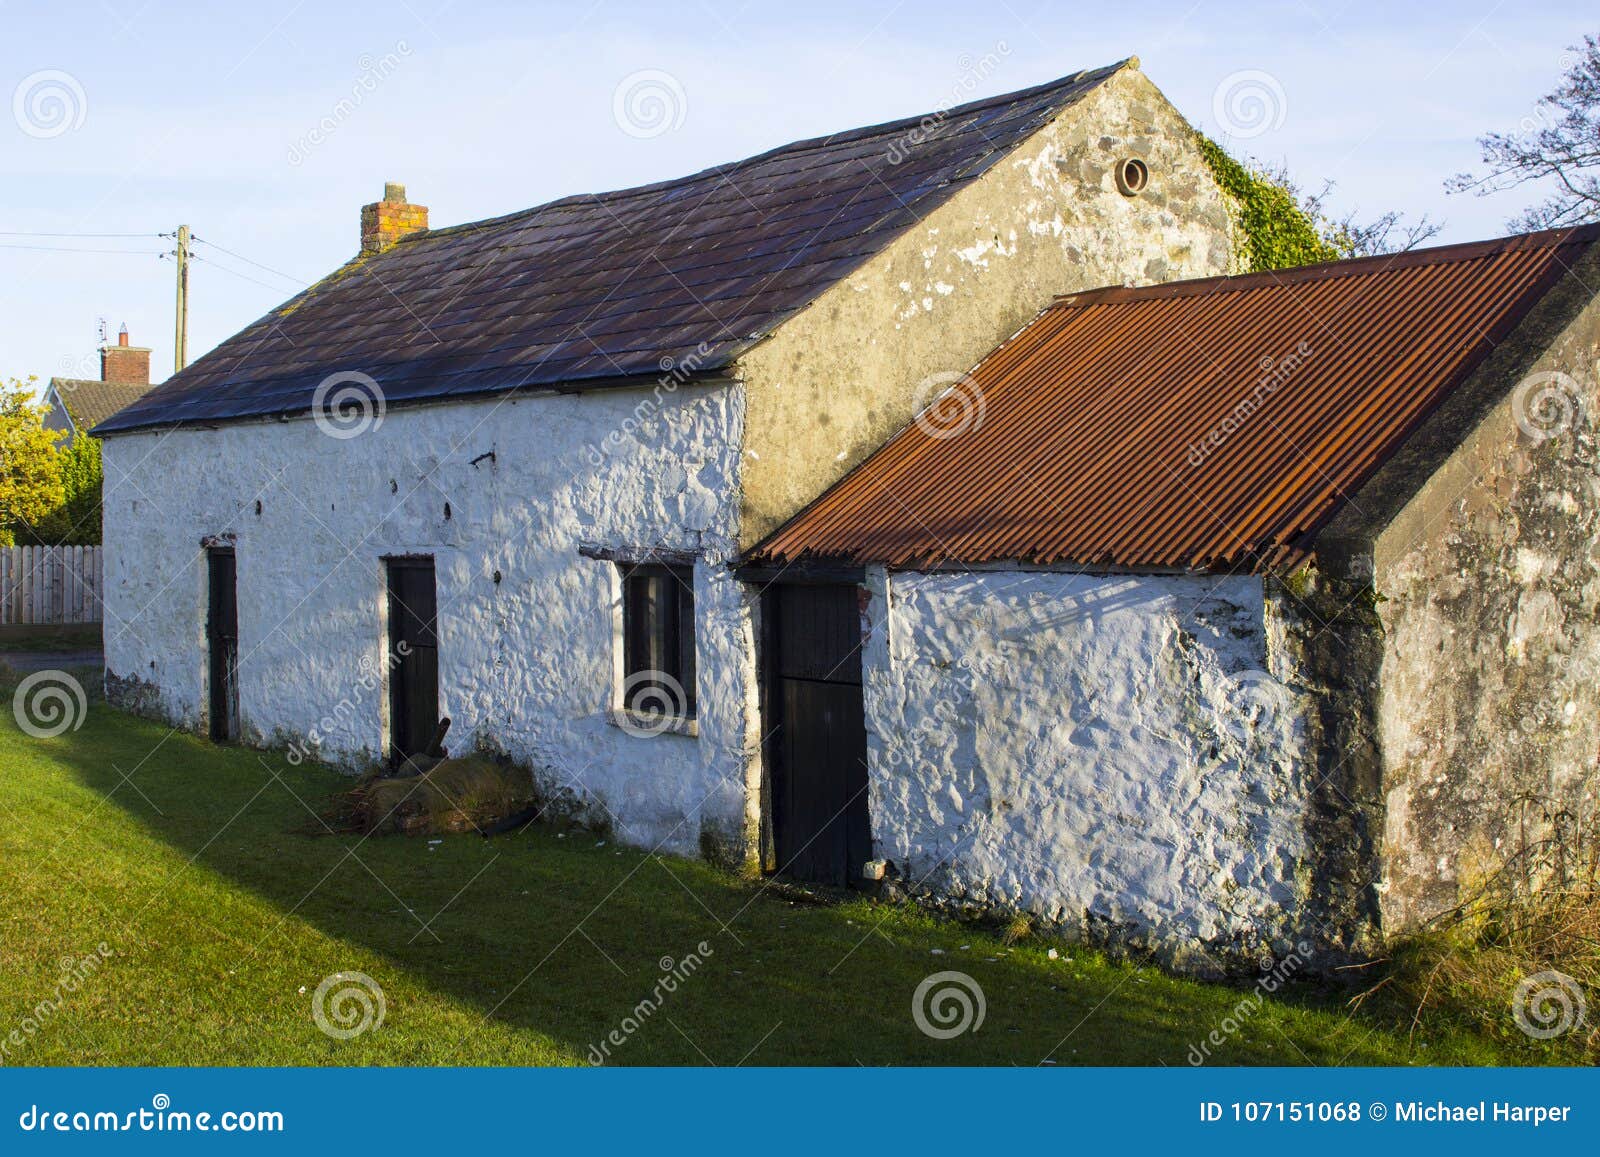 An Old Whitewashed Stone Built Irish Cottage With A Small Annex